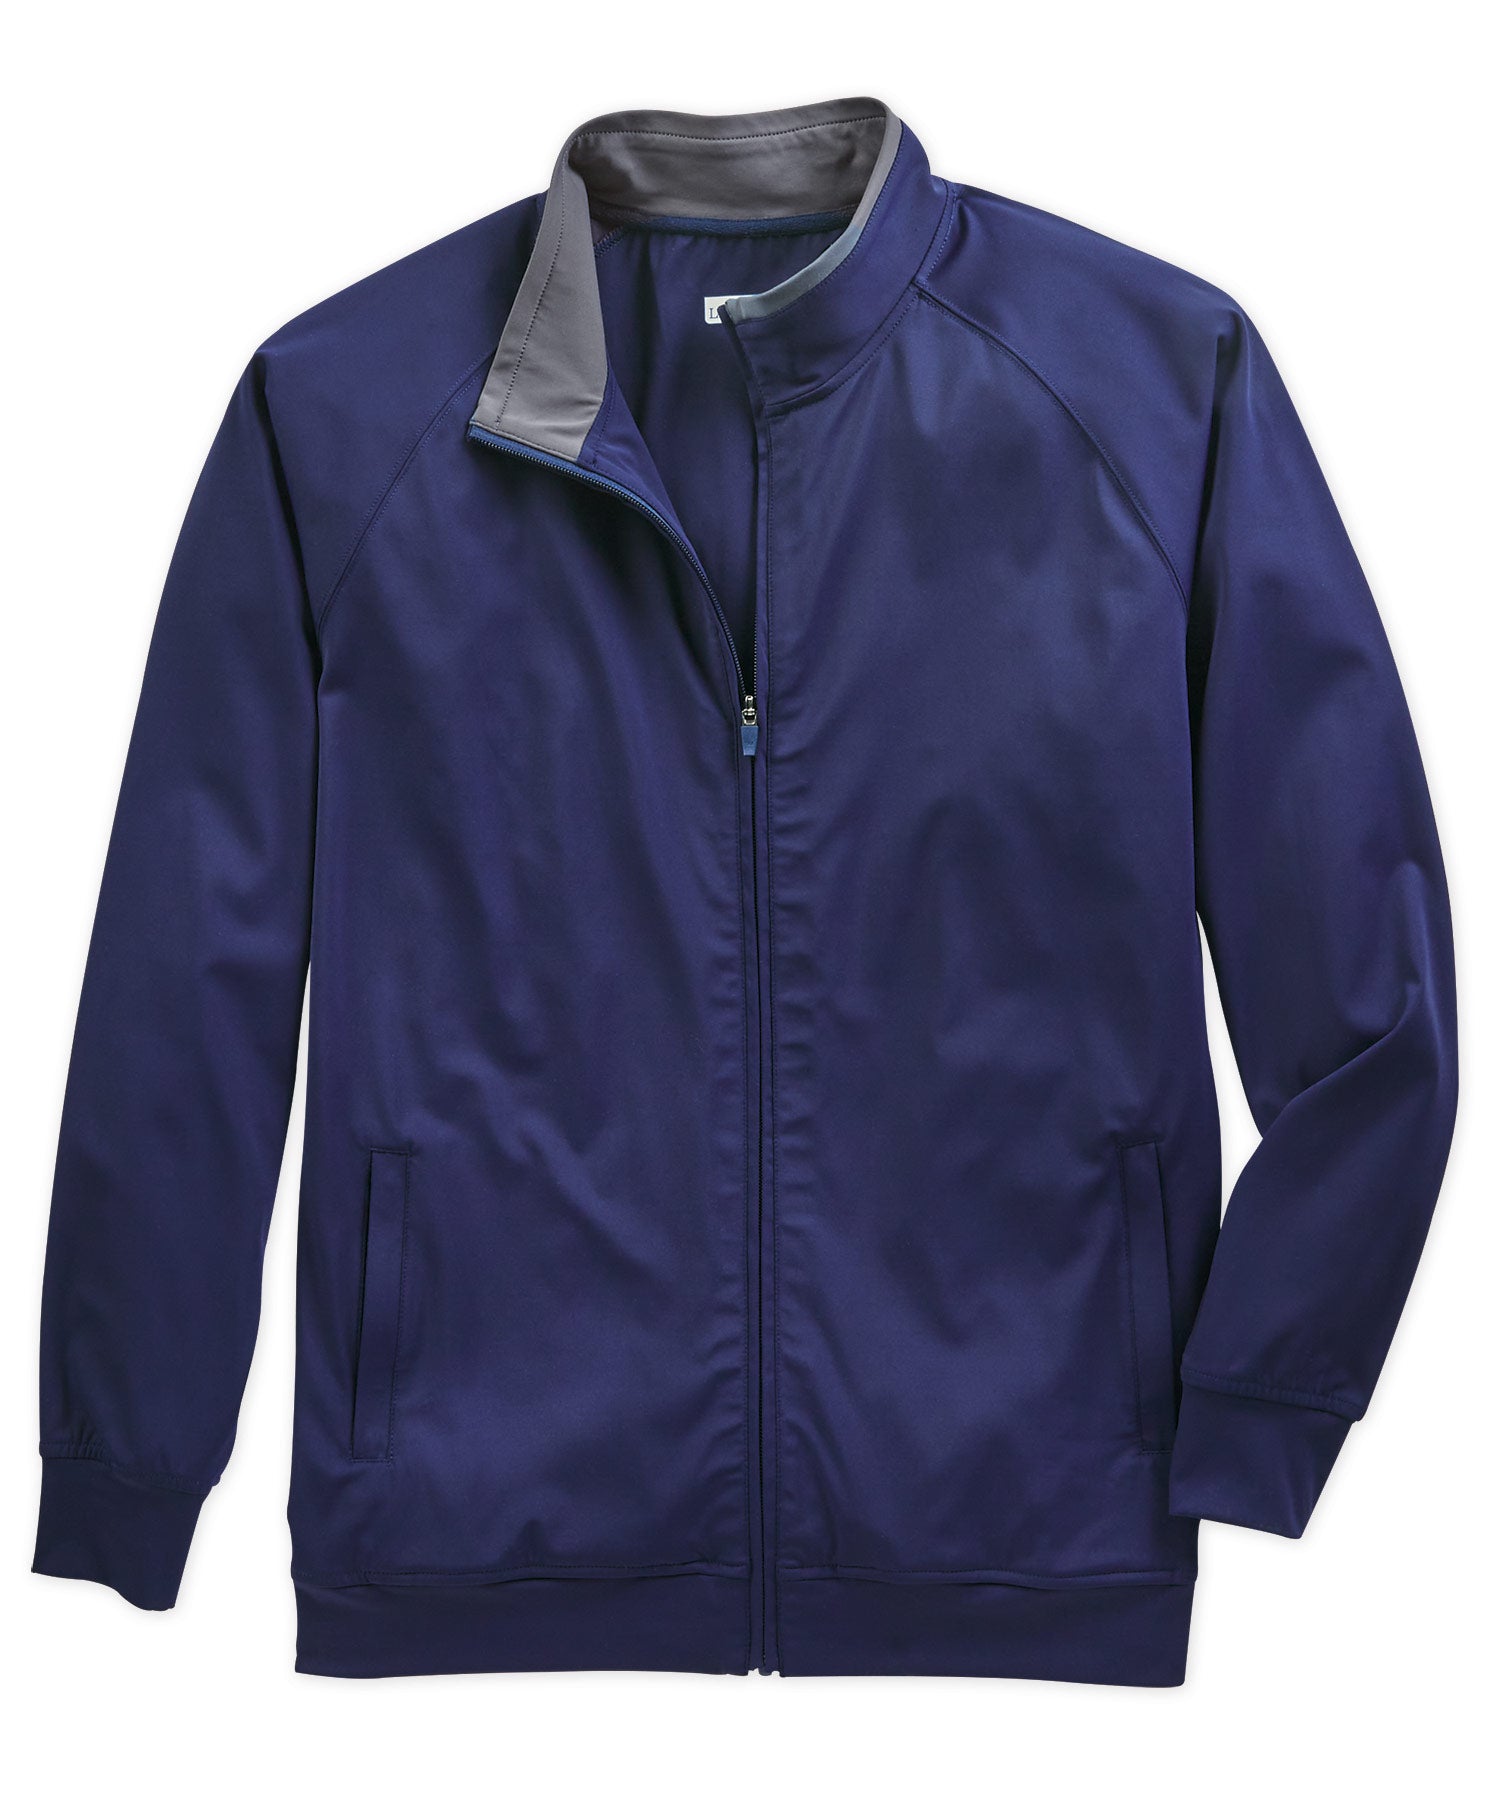 Westport Lifestyle All Day Performance Jacket, Men's Big & Tall